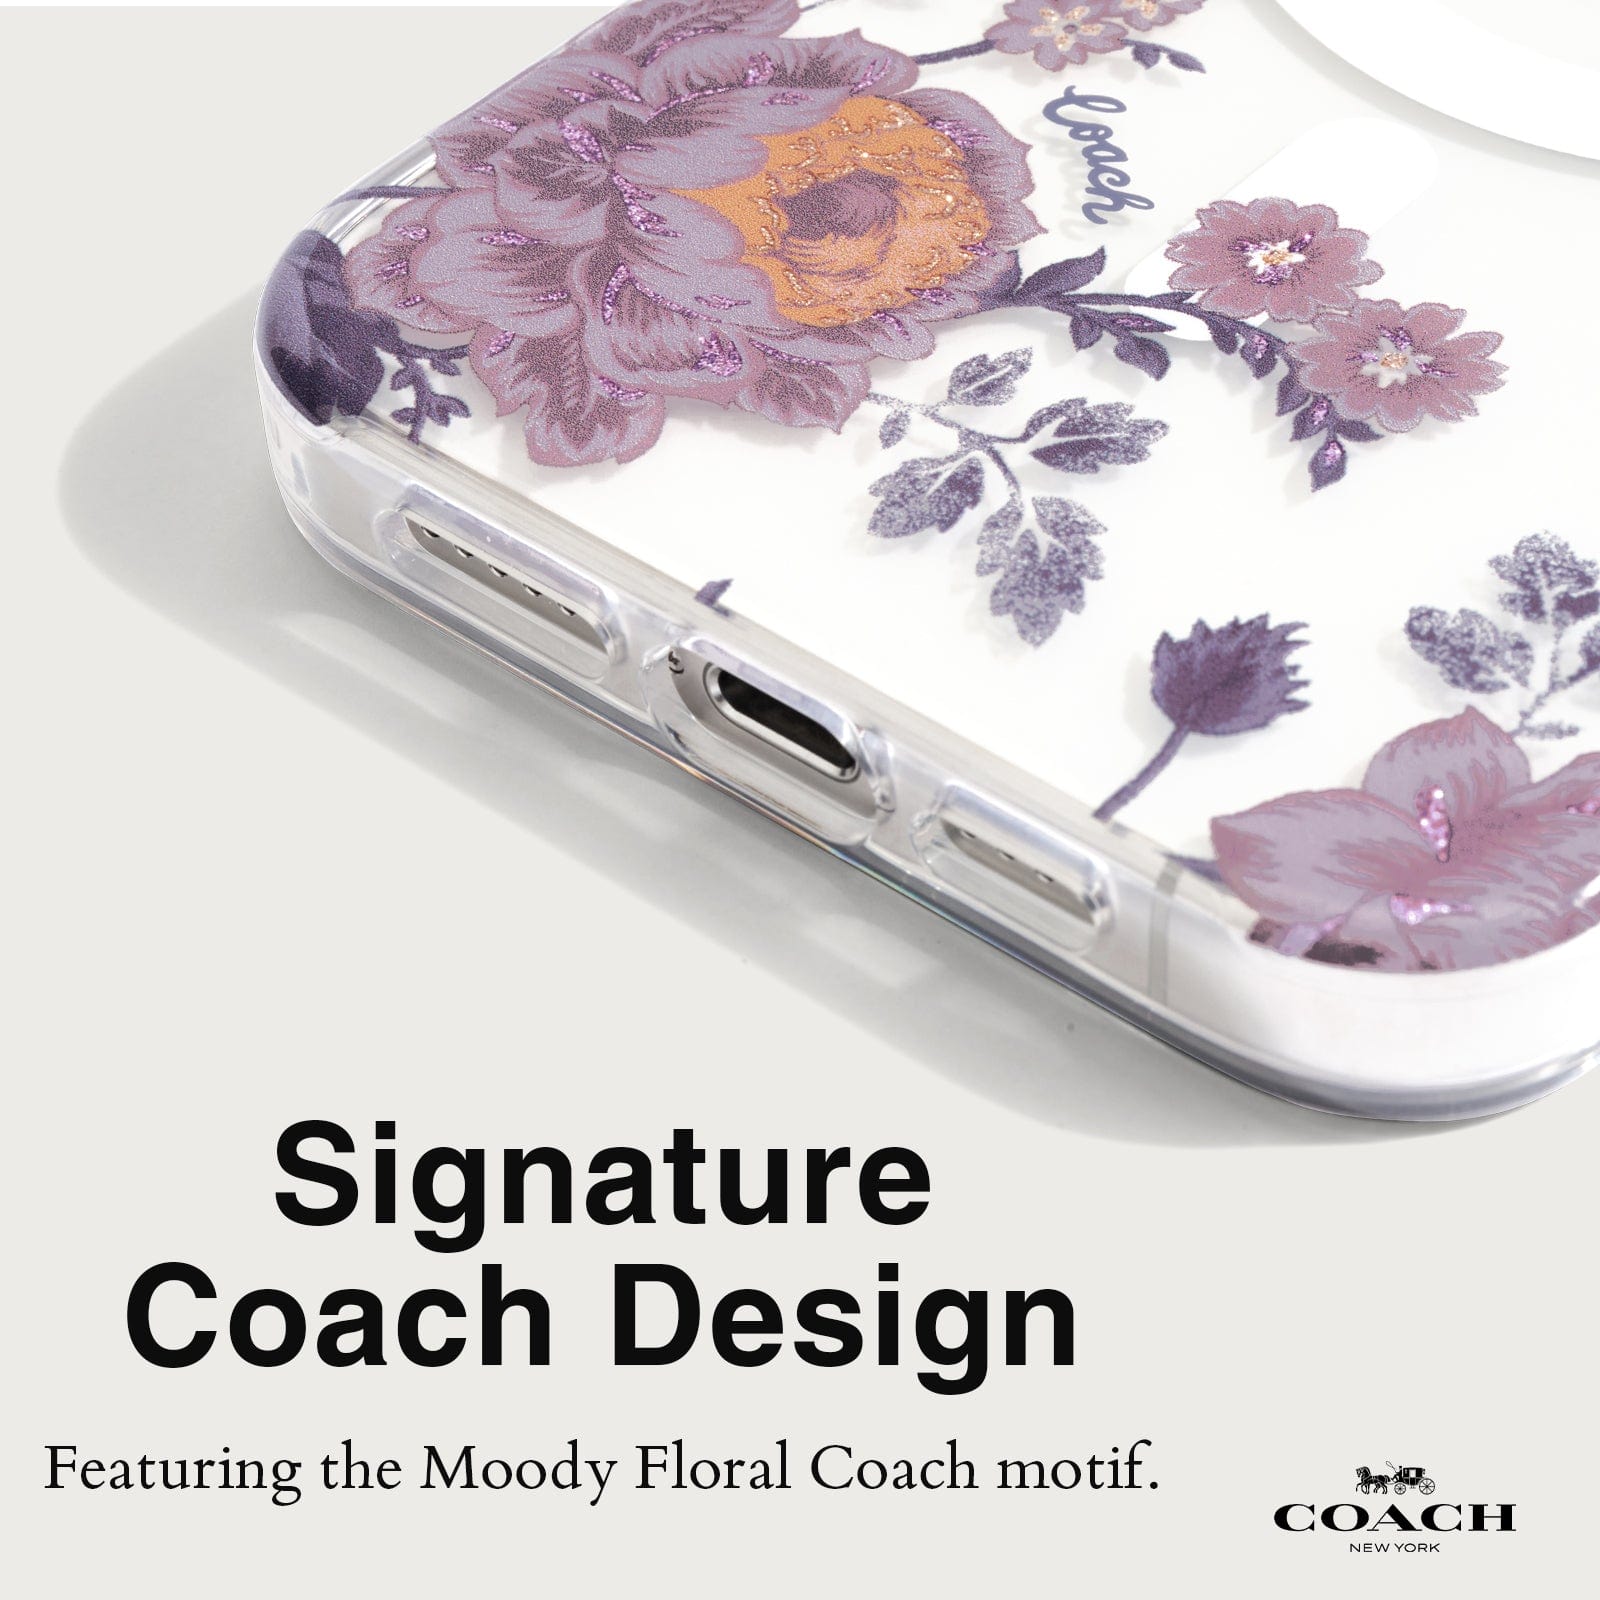 SIGNATURE COACH DESIGN. FEATURING THE MOODY FLORAL COACH MOTIF